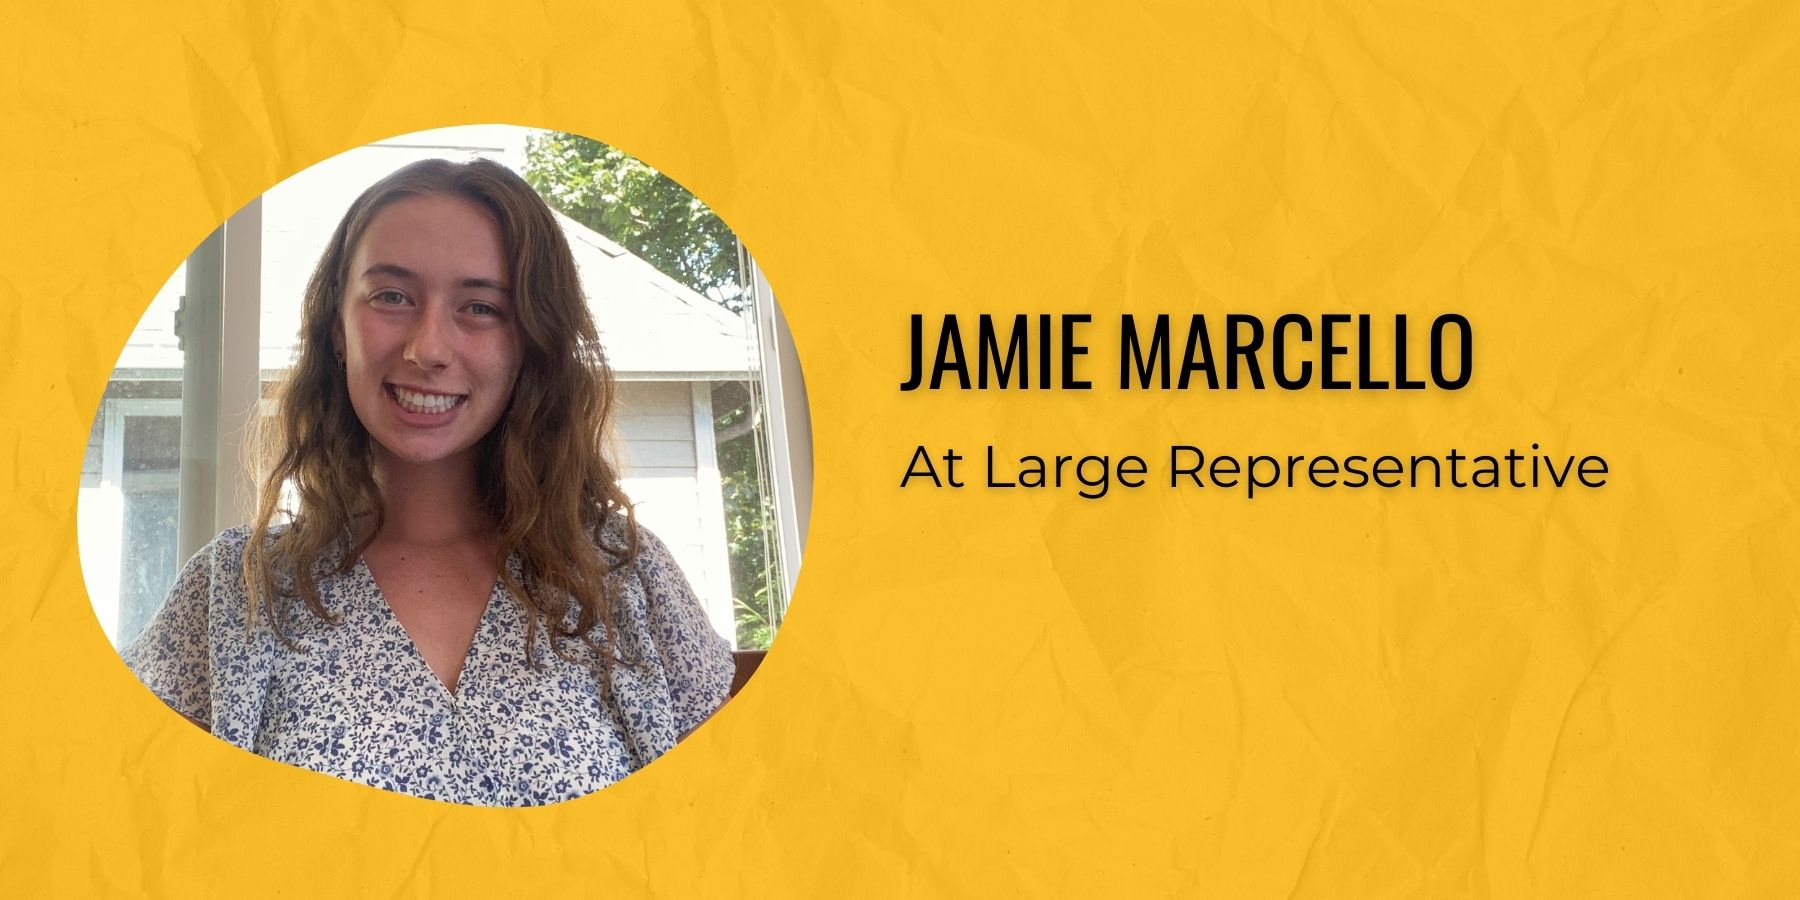 Image of Jamie Marcello and text: At Large Representative